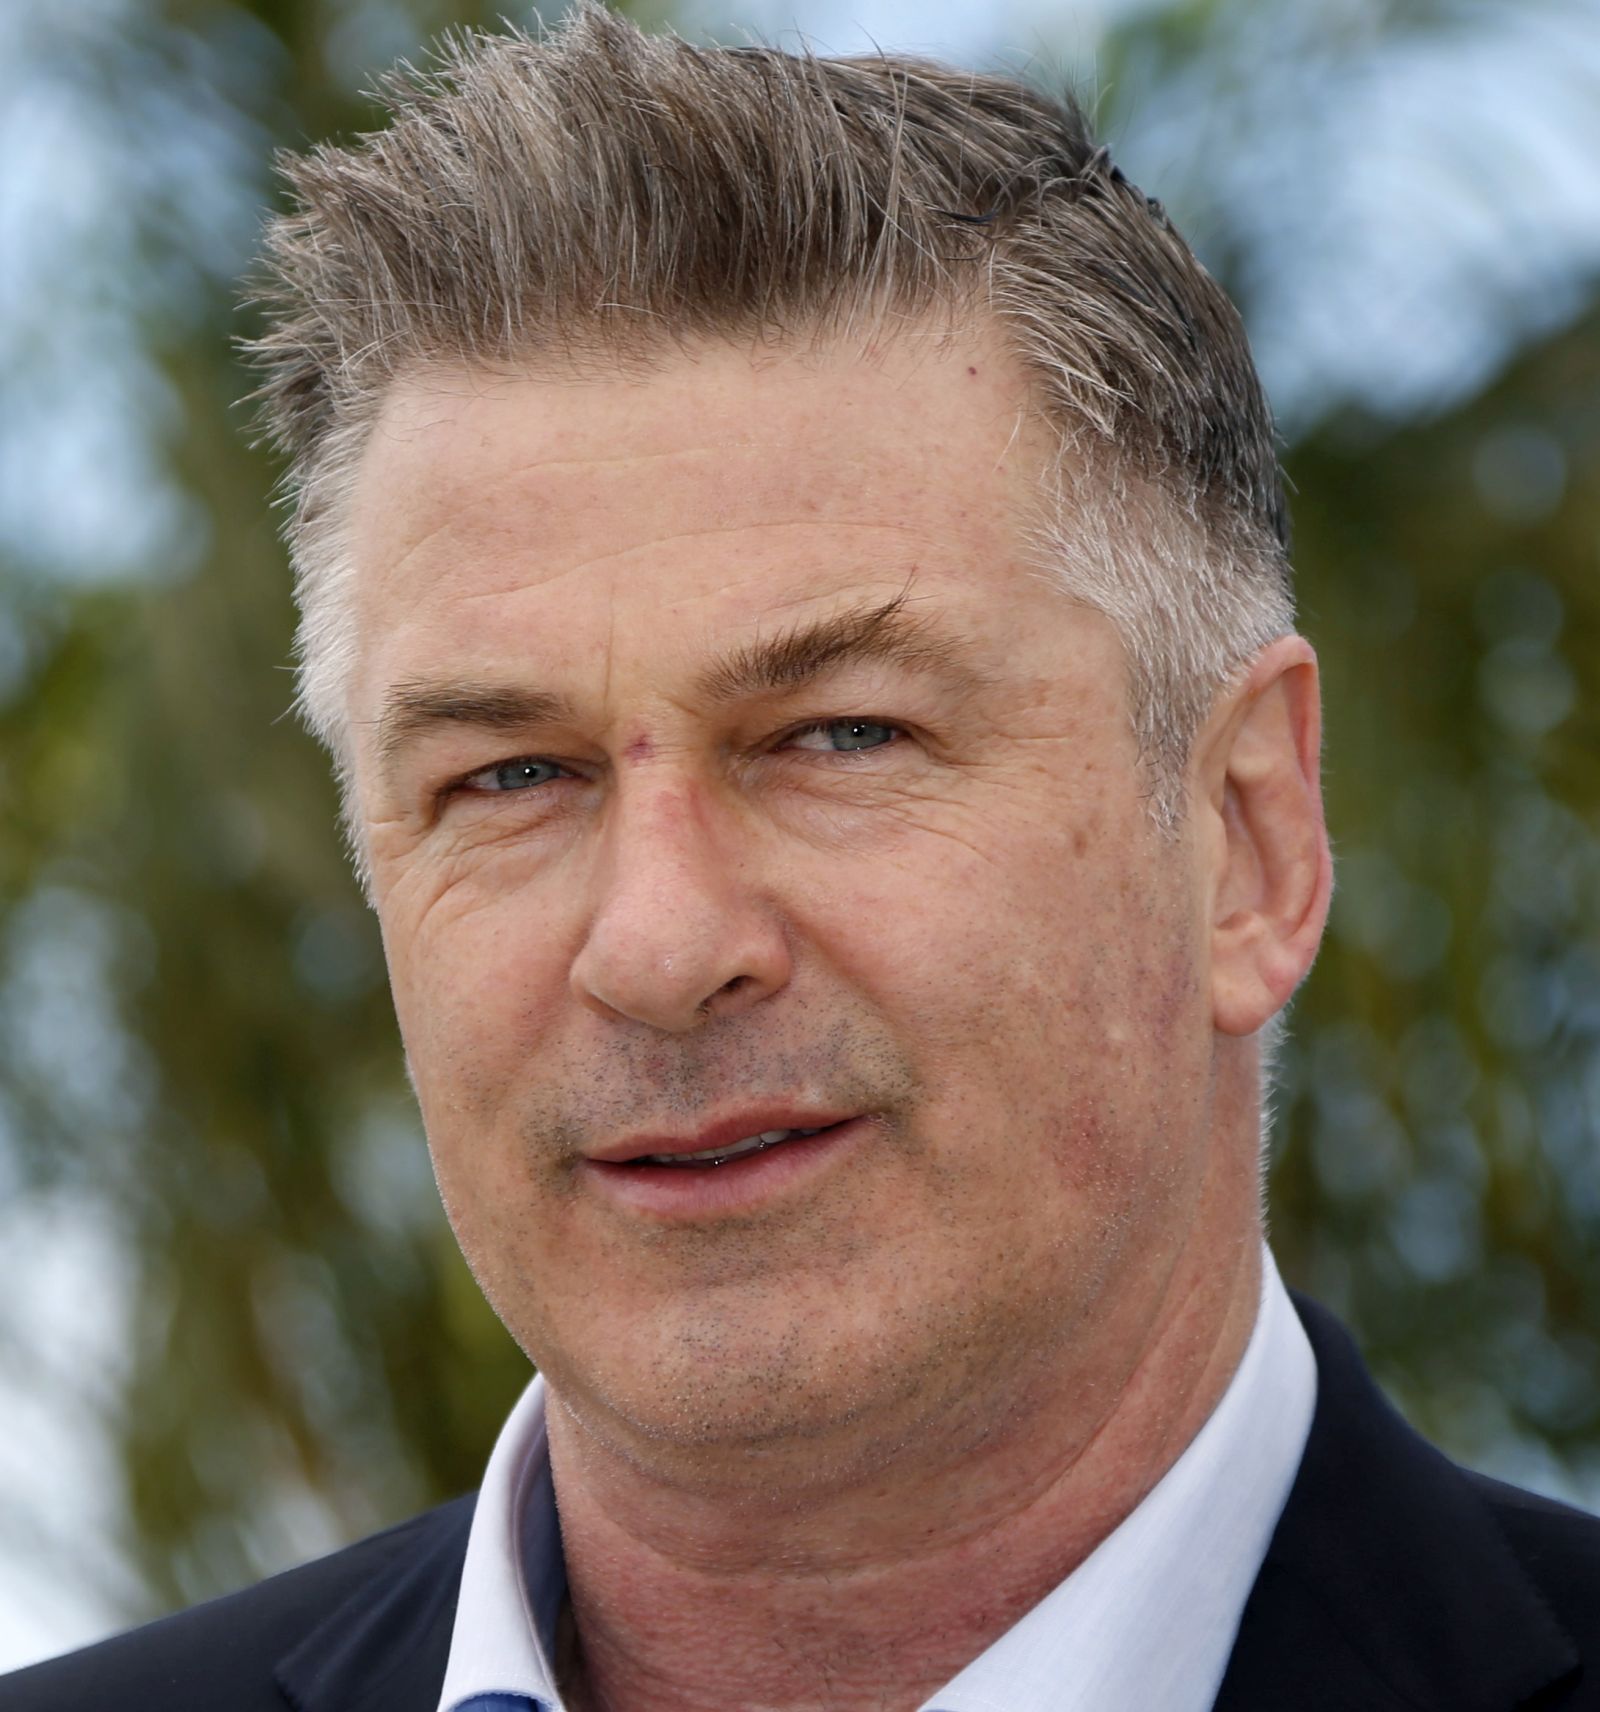 epa09538189 (FILE) - US actor Alec Baldwin poses during the photocall for 'Seduced and Abandoned' at the 66th annual Cannes Film Festival in Cannes, France, 21 May 2013 (reissued 22 October 2021). According to law enforcement officials in the US state of New Mexico, one person has died and another was wounded after a prop firearm discharged on the set of the film 'Rust'. The incident took place at Bonanza Creek Ranch in New Mexico. US actor Alec Baldwin plays the namesake role in the film, and was reporteldy handling the weapon when it discharged.  EPA/GUILLAUME HORCAJUELO